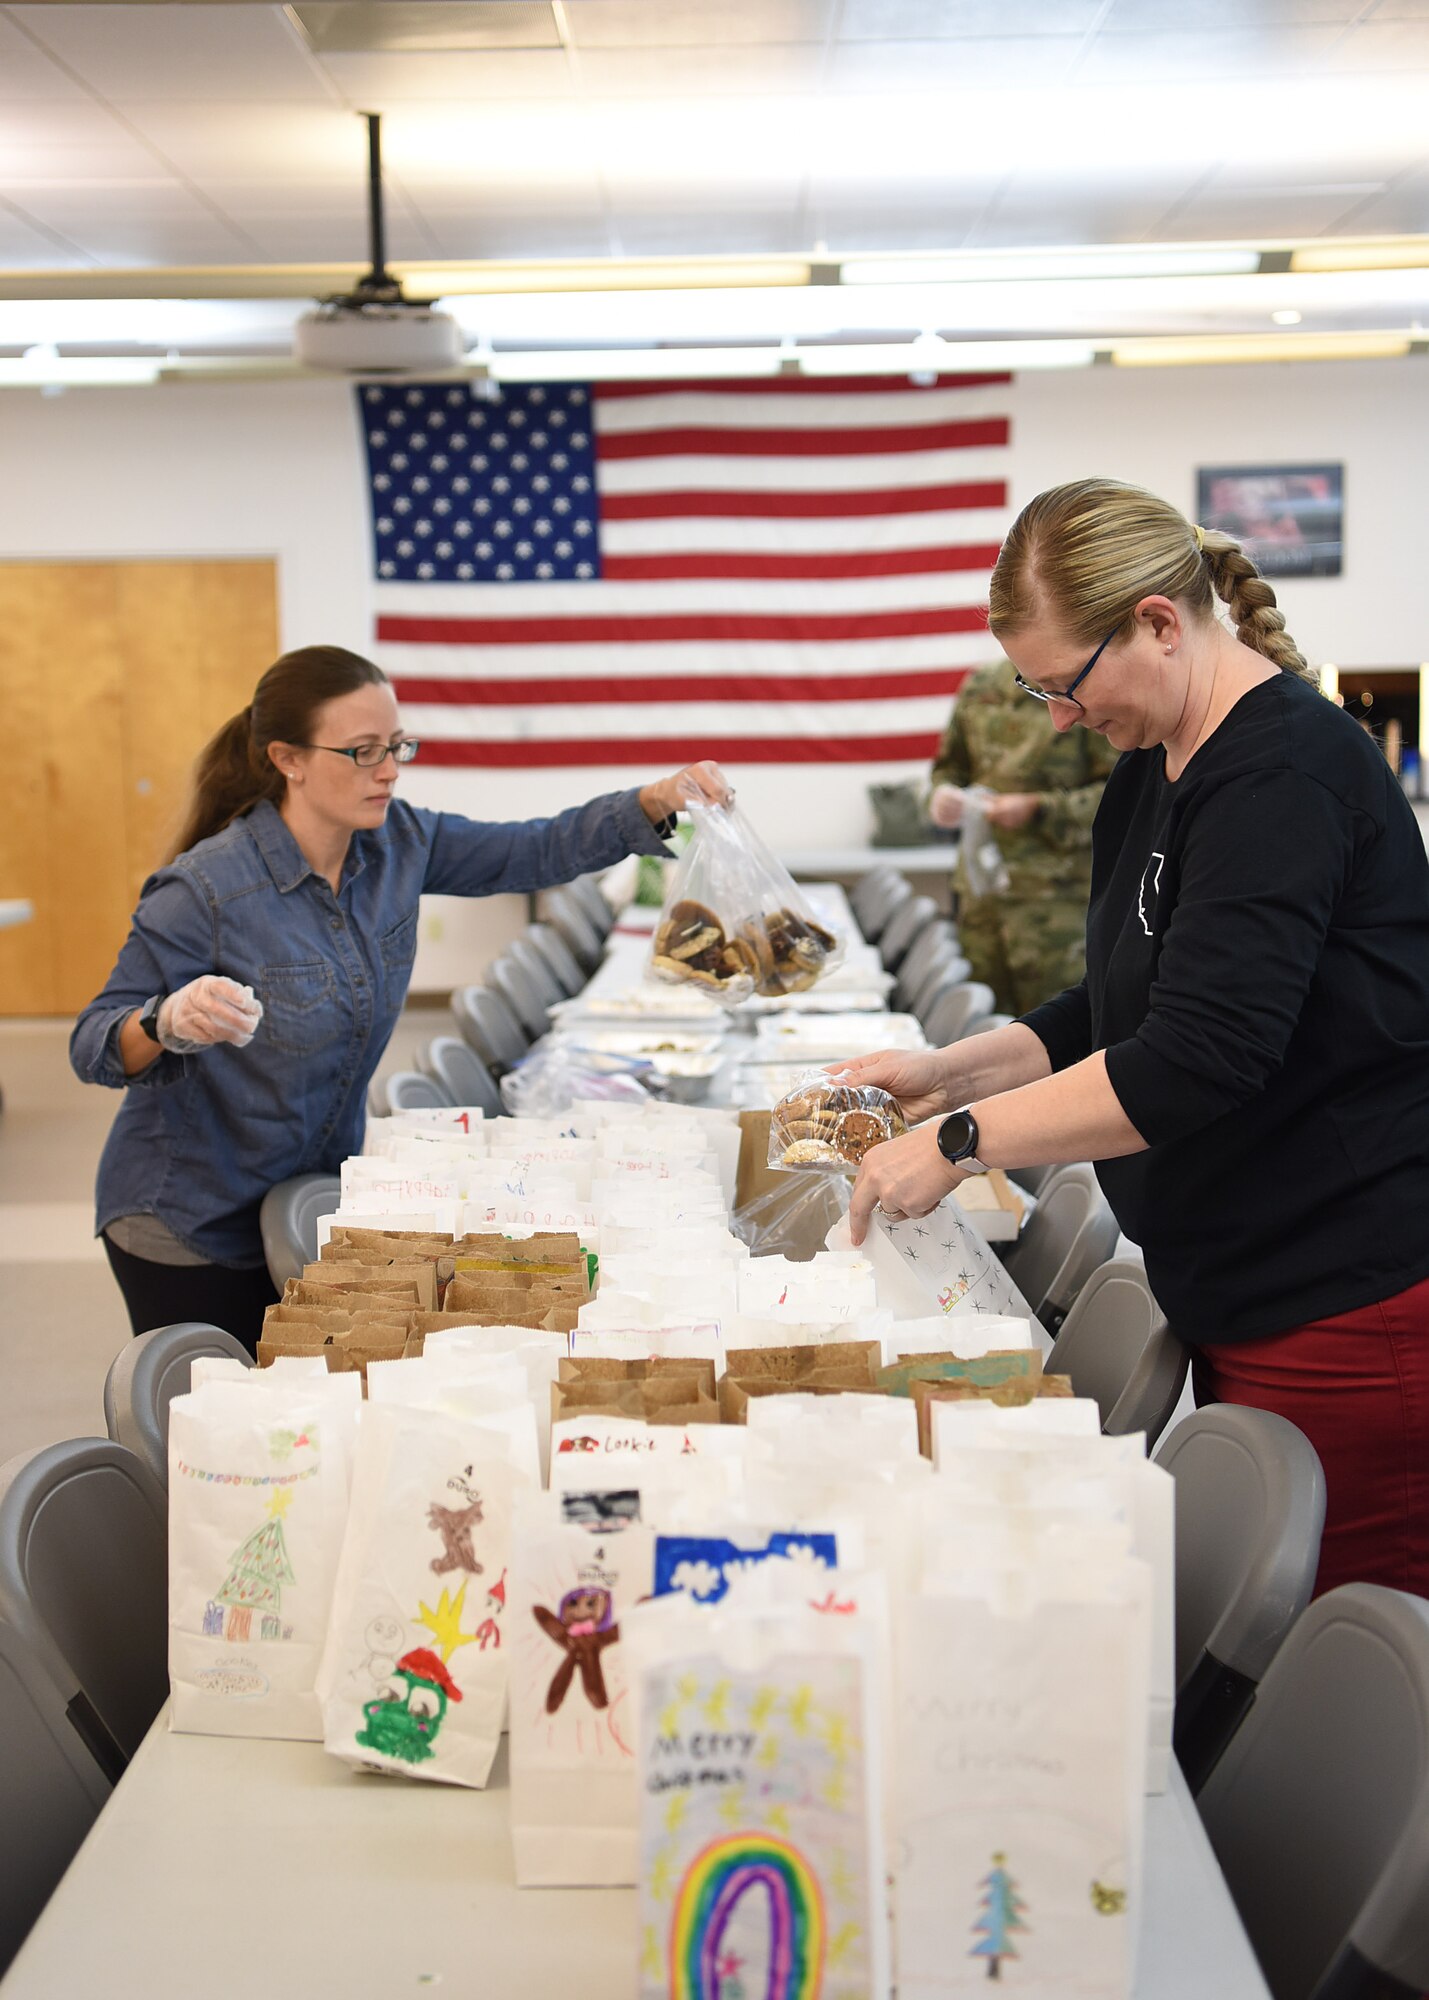 Vandenberg Air Force Base Spouse’s Club members bag cookies for the 2019 Cookie Drive Dec. 16, 2019, at VAFB, Calif. During the drive, VAFB Spouse’s Club members packaged cookies in bags decorated by students from local schools and delivered the bags to Airmen across the base.  (U.S. Air Force photo by Airman 1st Class Hanah Abercrombie)